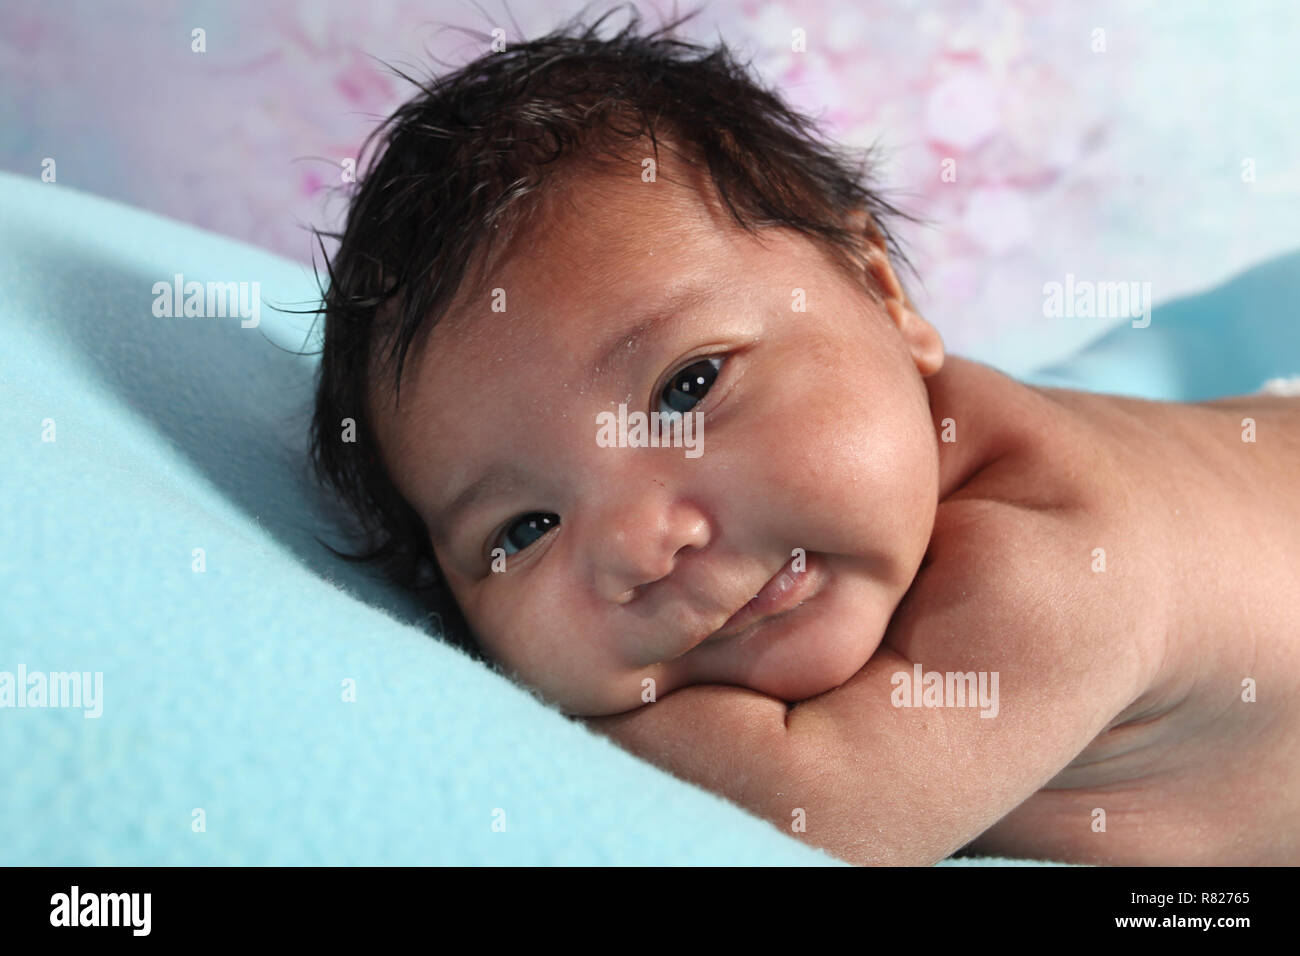 Mixed Race New Born Baby Boy Banque D'Images